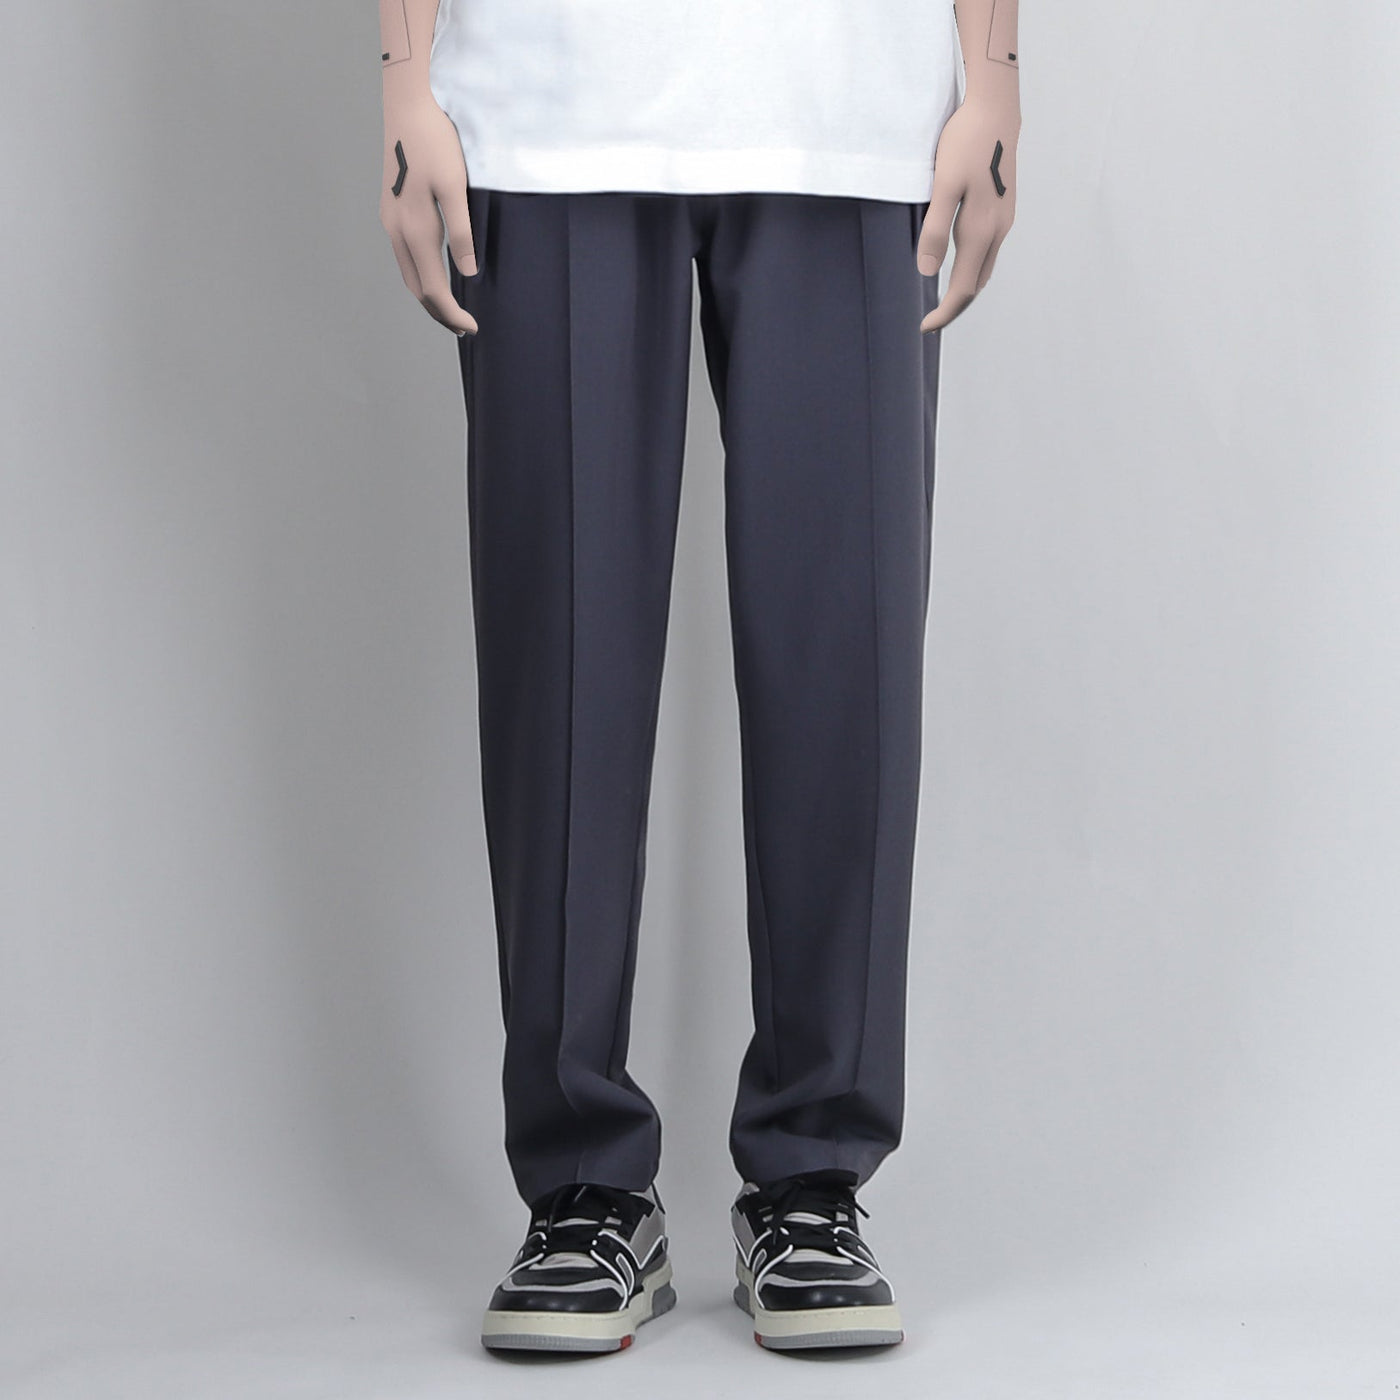 Relaxed Fit Pants Korean Street Fashion Pants By Perdu Shop Online at OH Vault